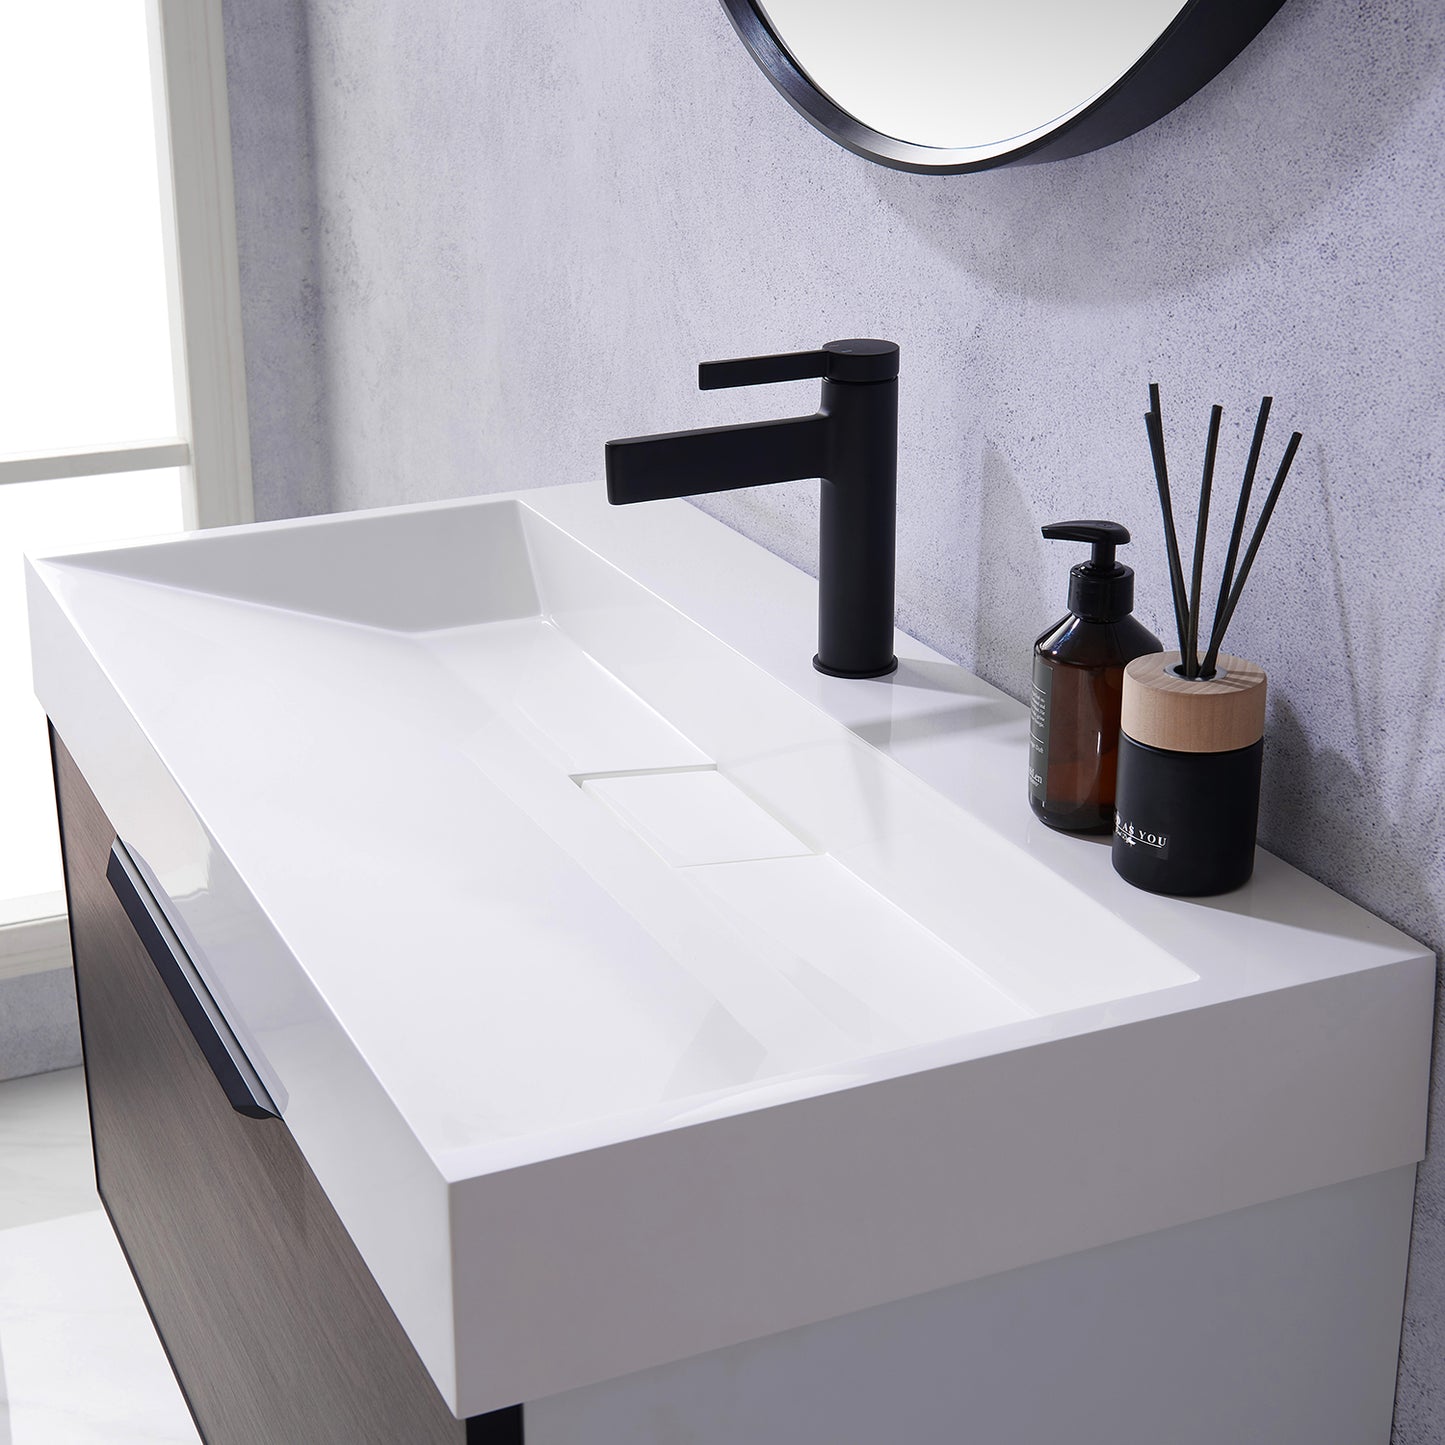 Vegadeo 36" Single Sink Bath Vanity in Suleiman Oak with White One-Piece Composite Stone Sink Top and Mirror